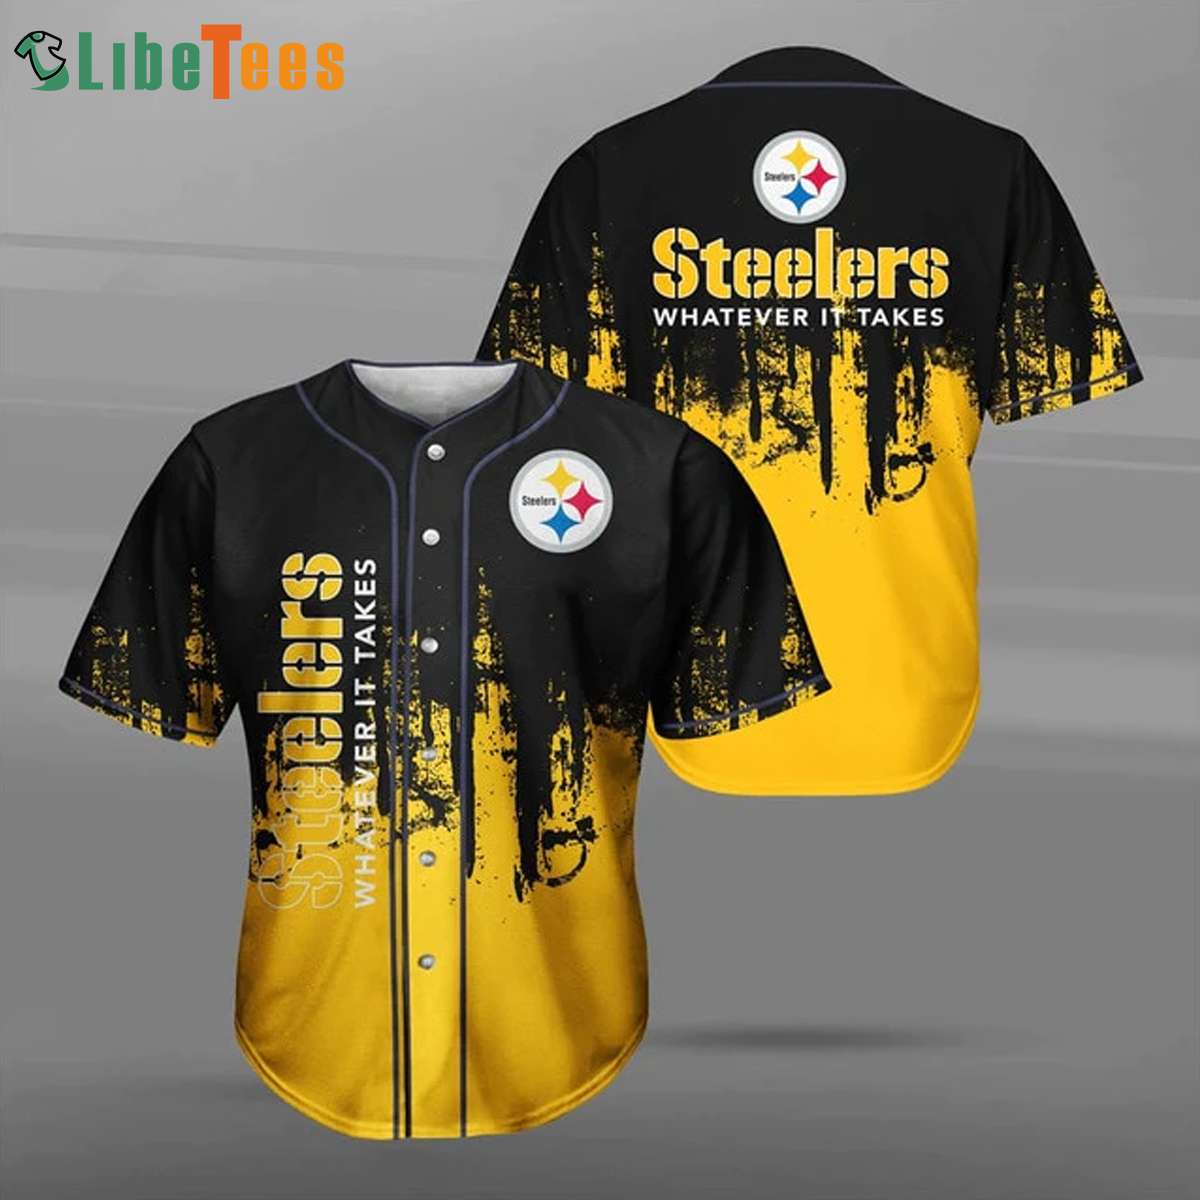 Pittsburgh Steelers Baseball Jersey Whatever It Takes